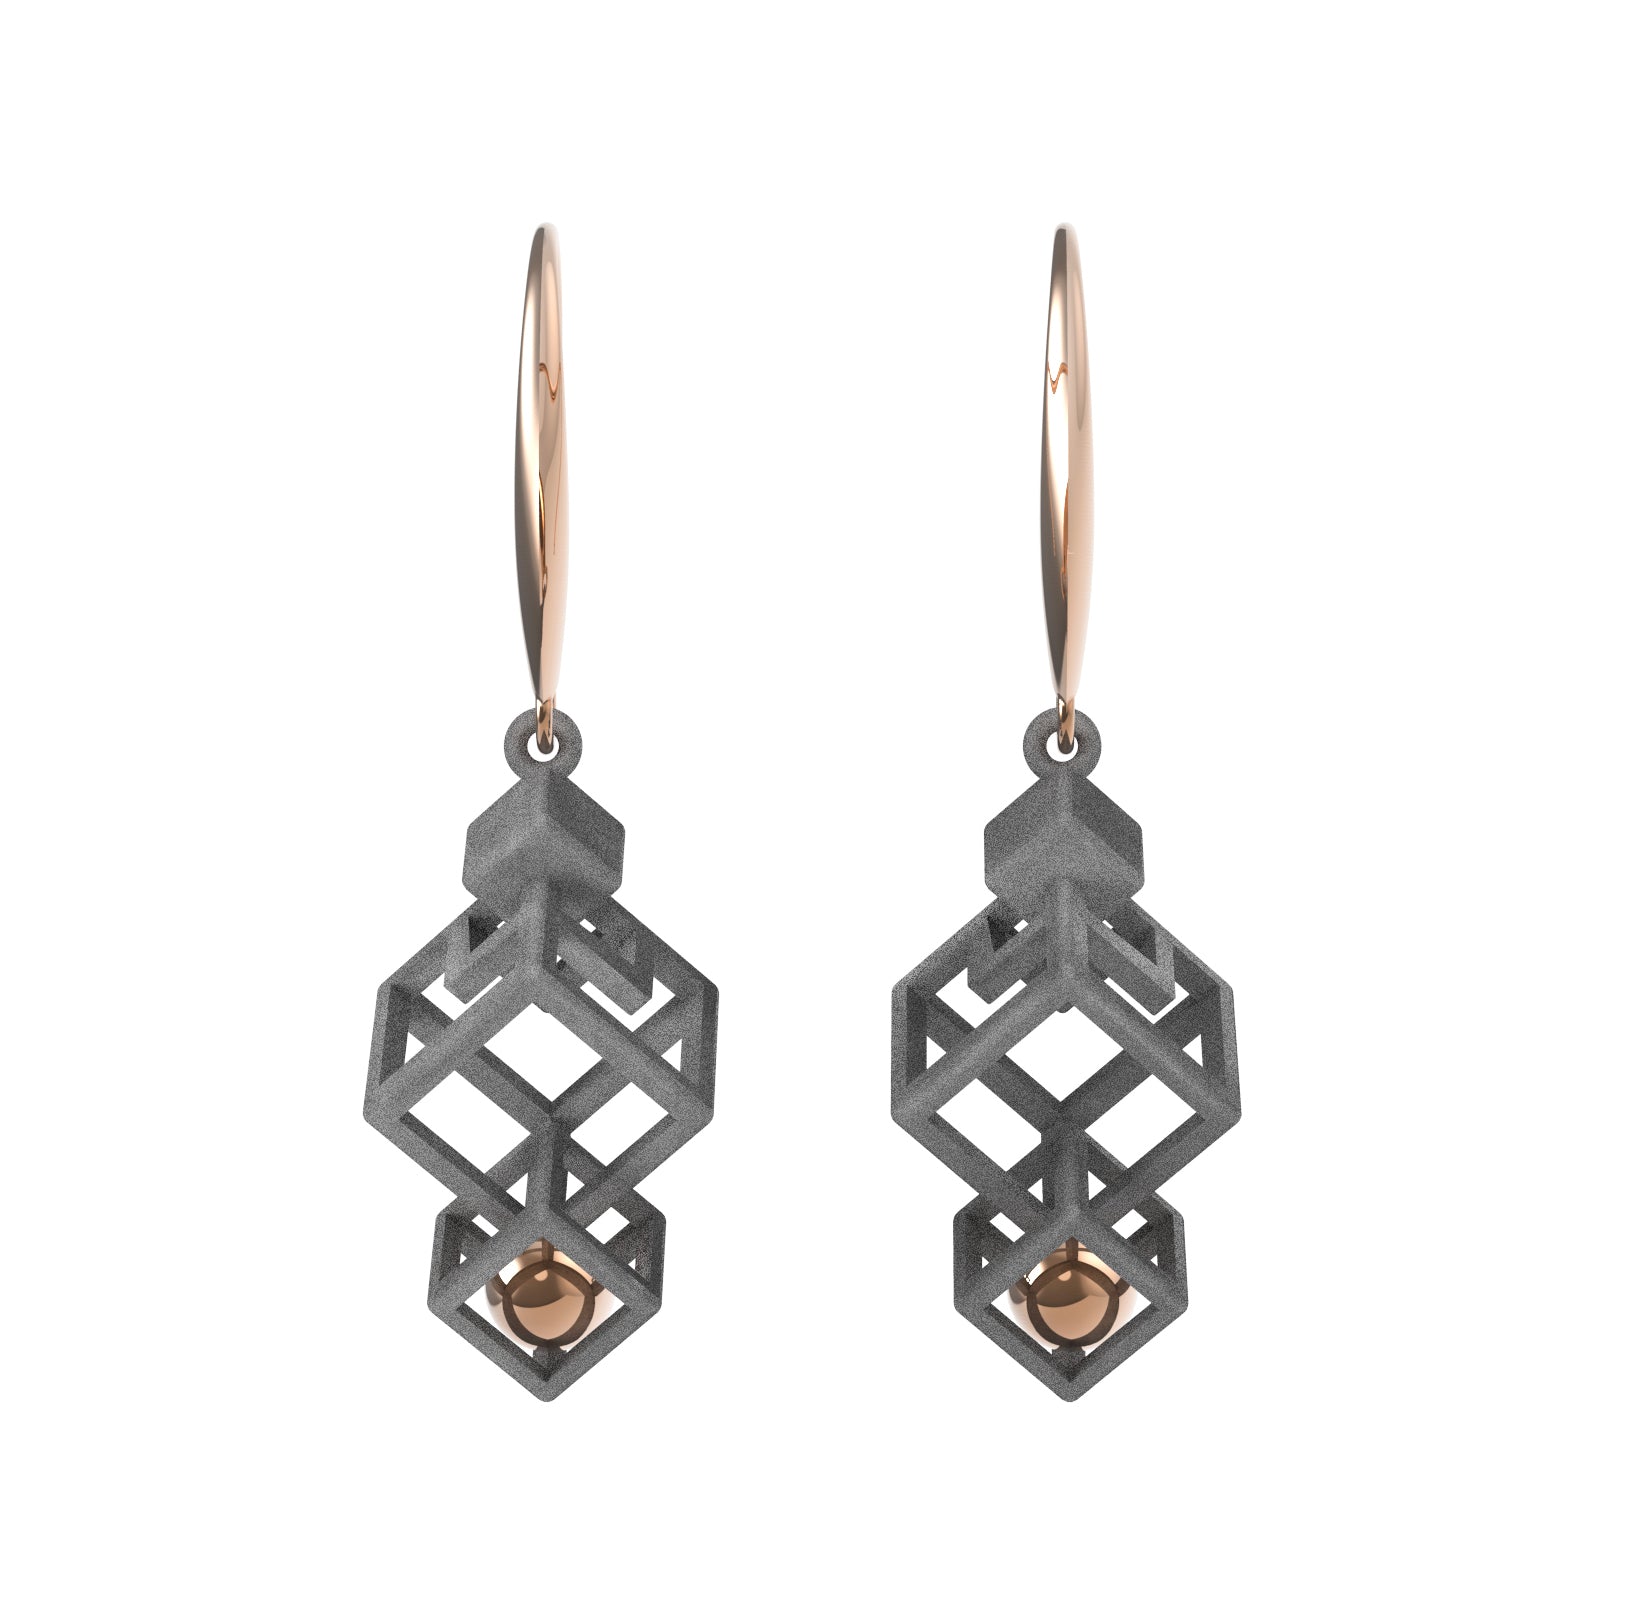 Infinity Art Series - Movable ball in boxes earrings (GREY)